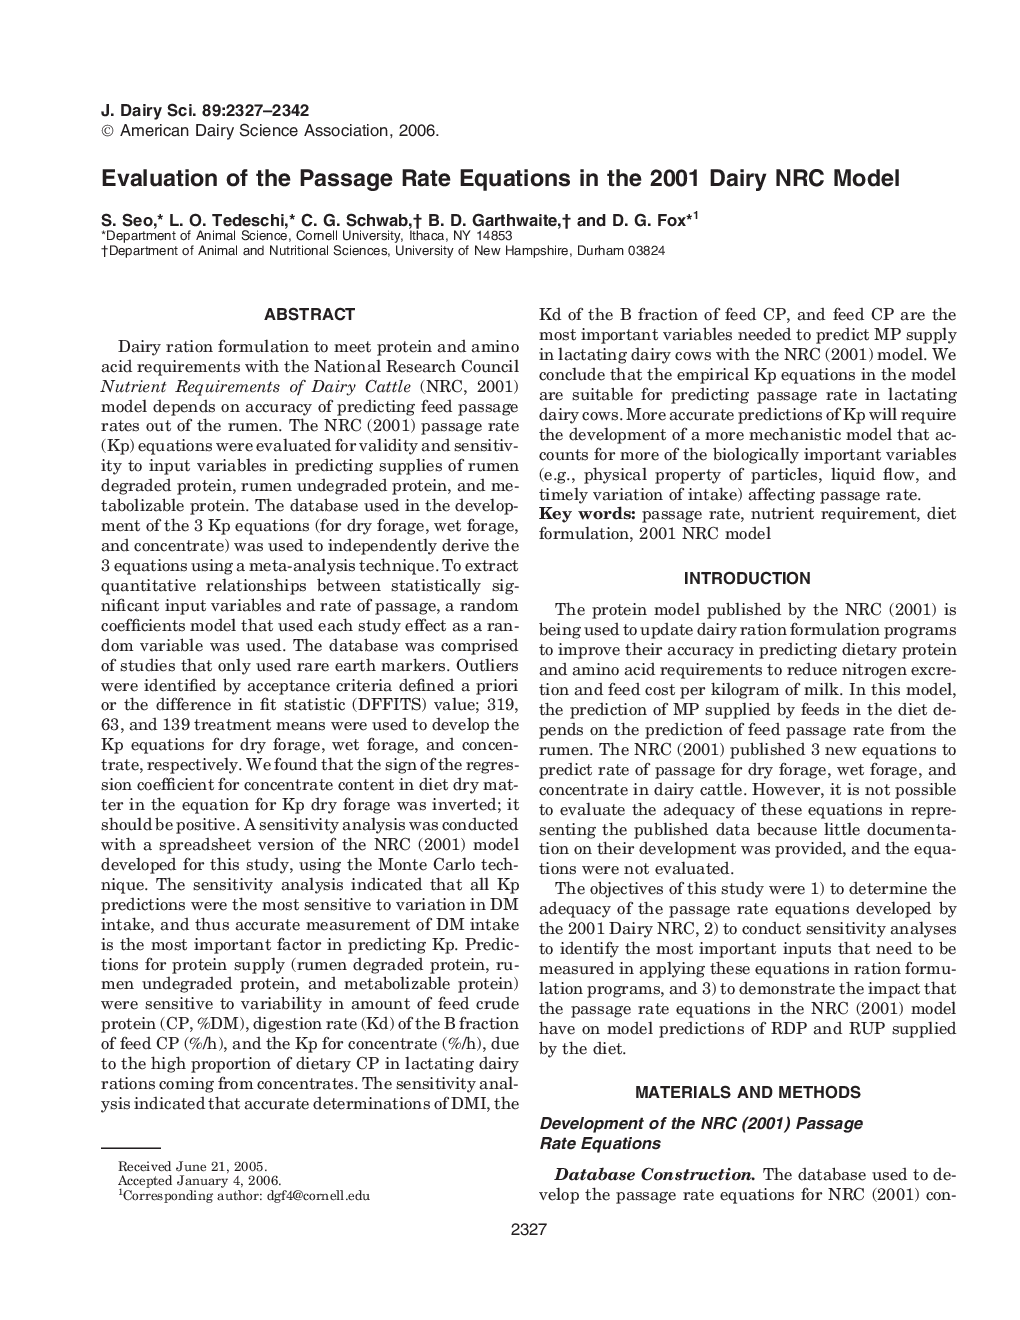 Evaluation of the Passage Rate Equations in the 2001 Dairy NRC Model